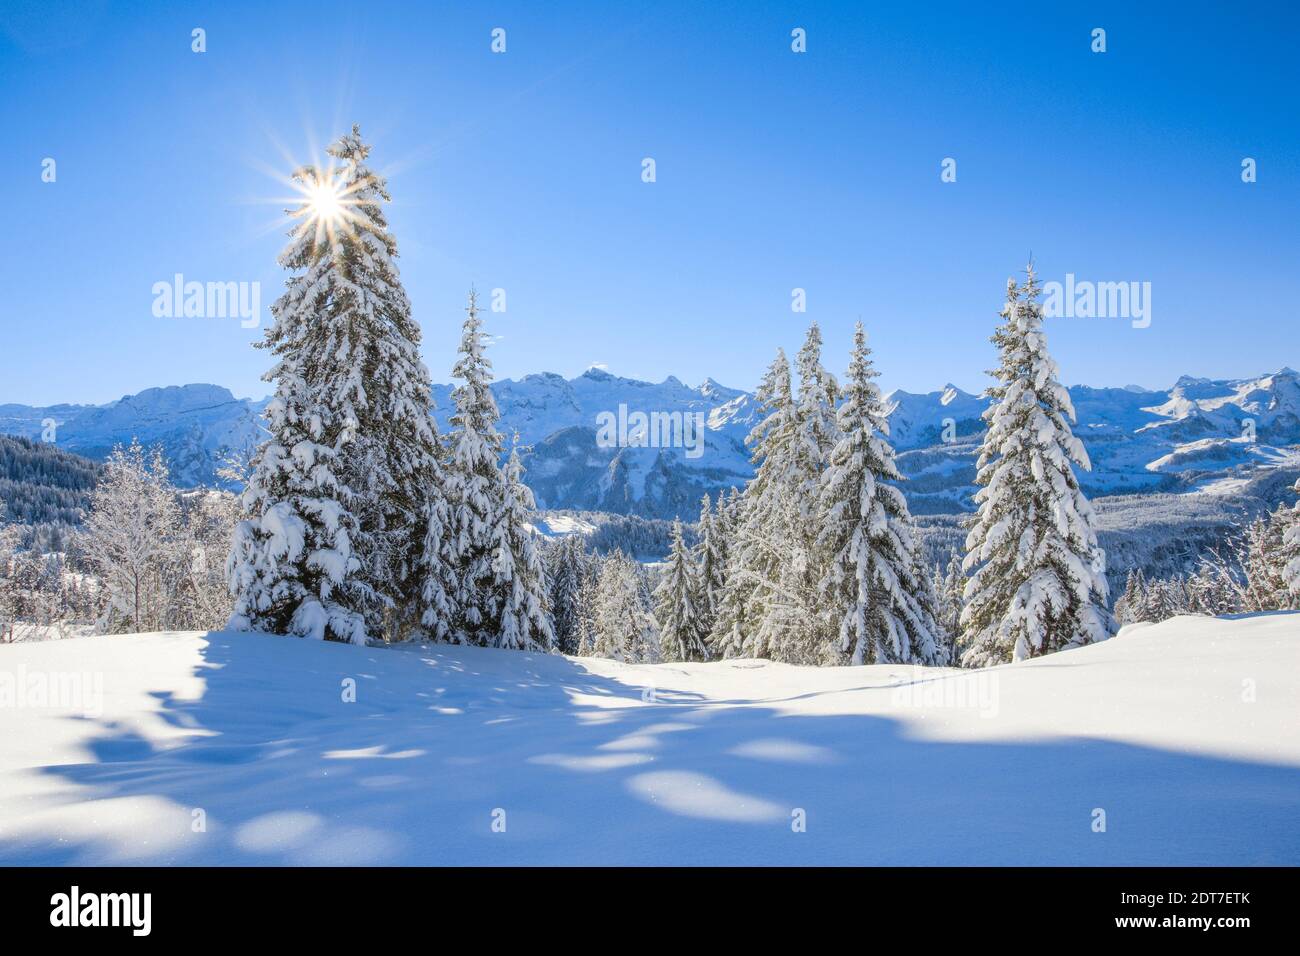 Norway spruce (Picea abies), winter in the Suisse Alps, Switzerland, Bernese Alps Stock Photo